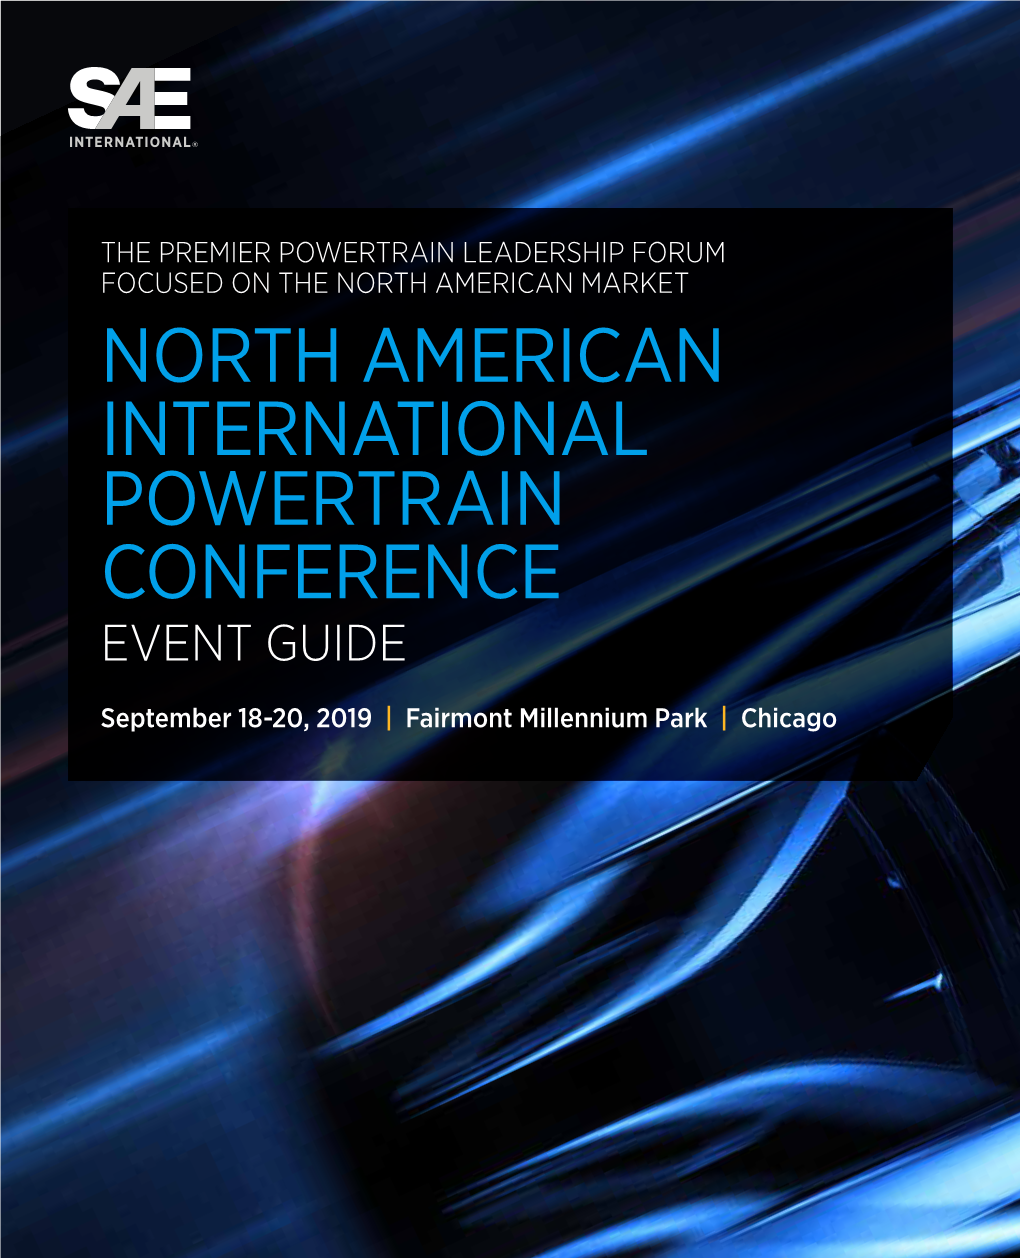 North American International Powertrain Conference Event Guide